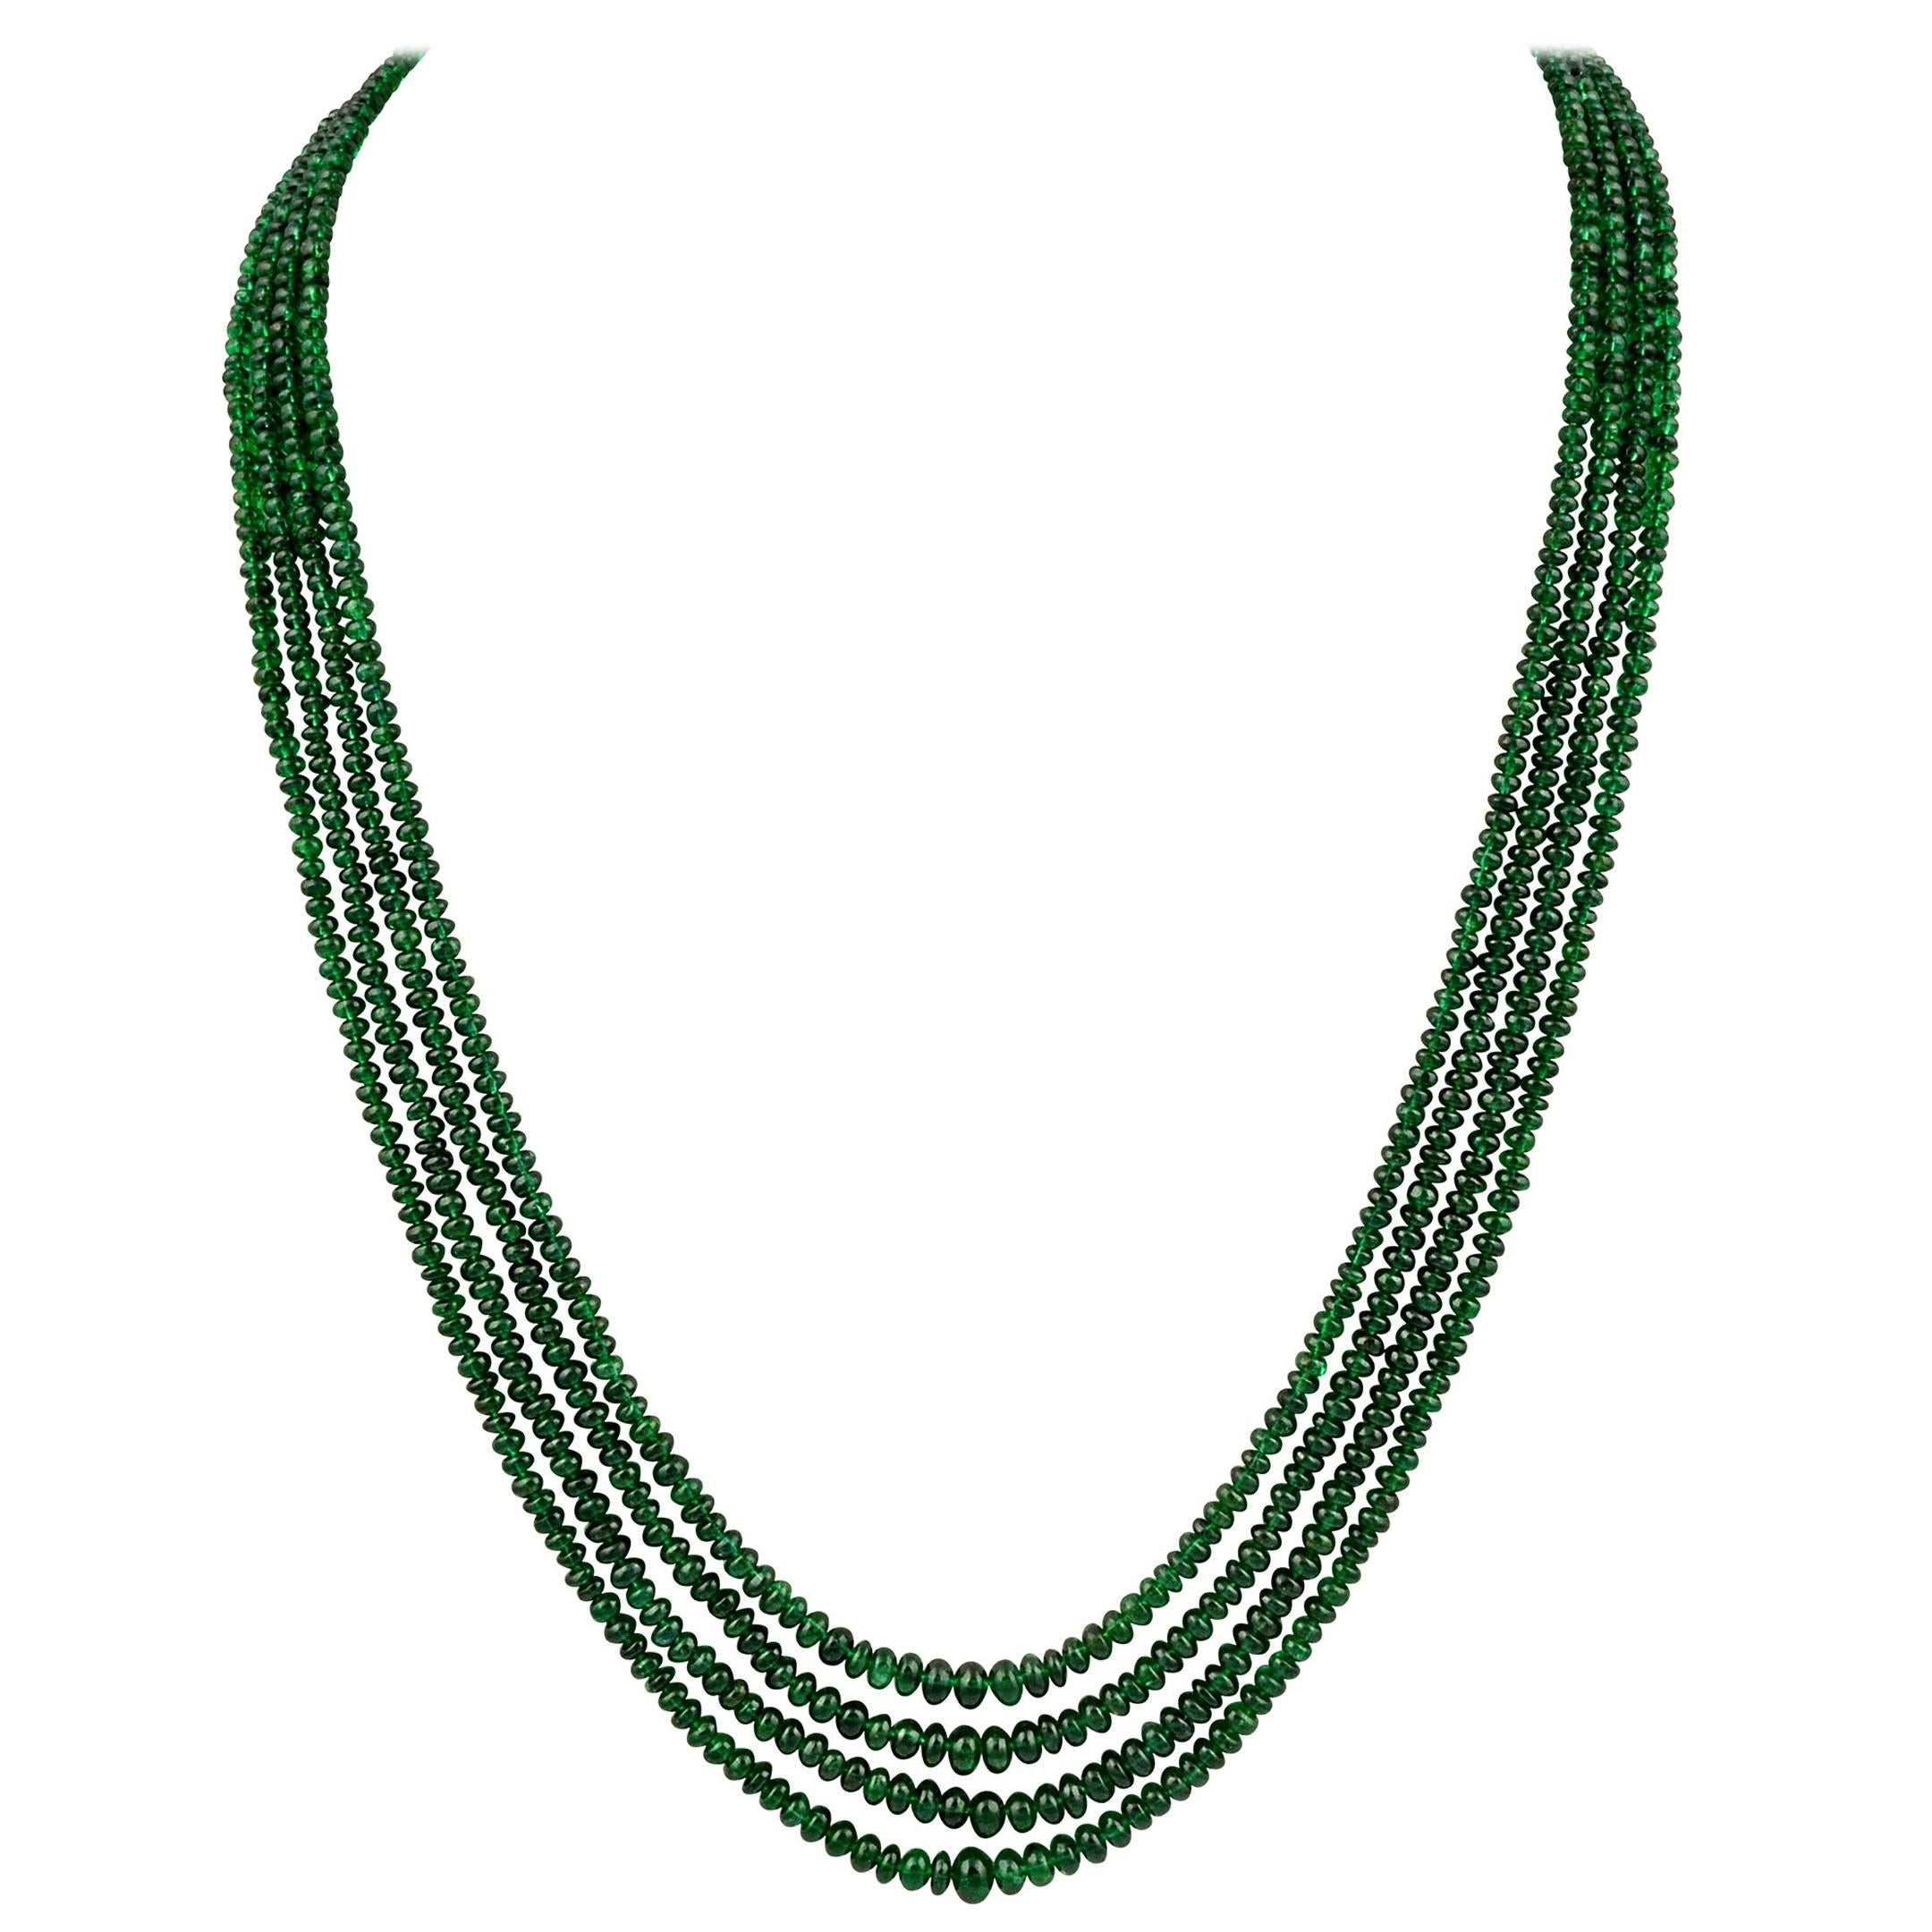 RARE 656.50 CTS EARTH MINED OVAL SHAPED RICH GREEN EMERALD BEADS NECKLACE STRAND 